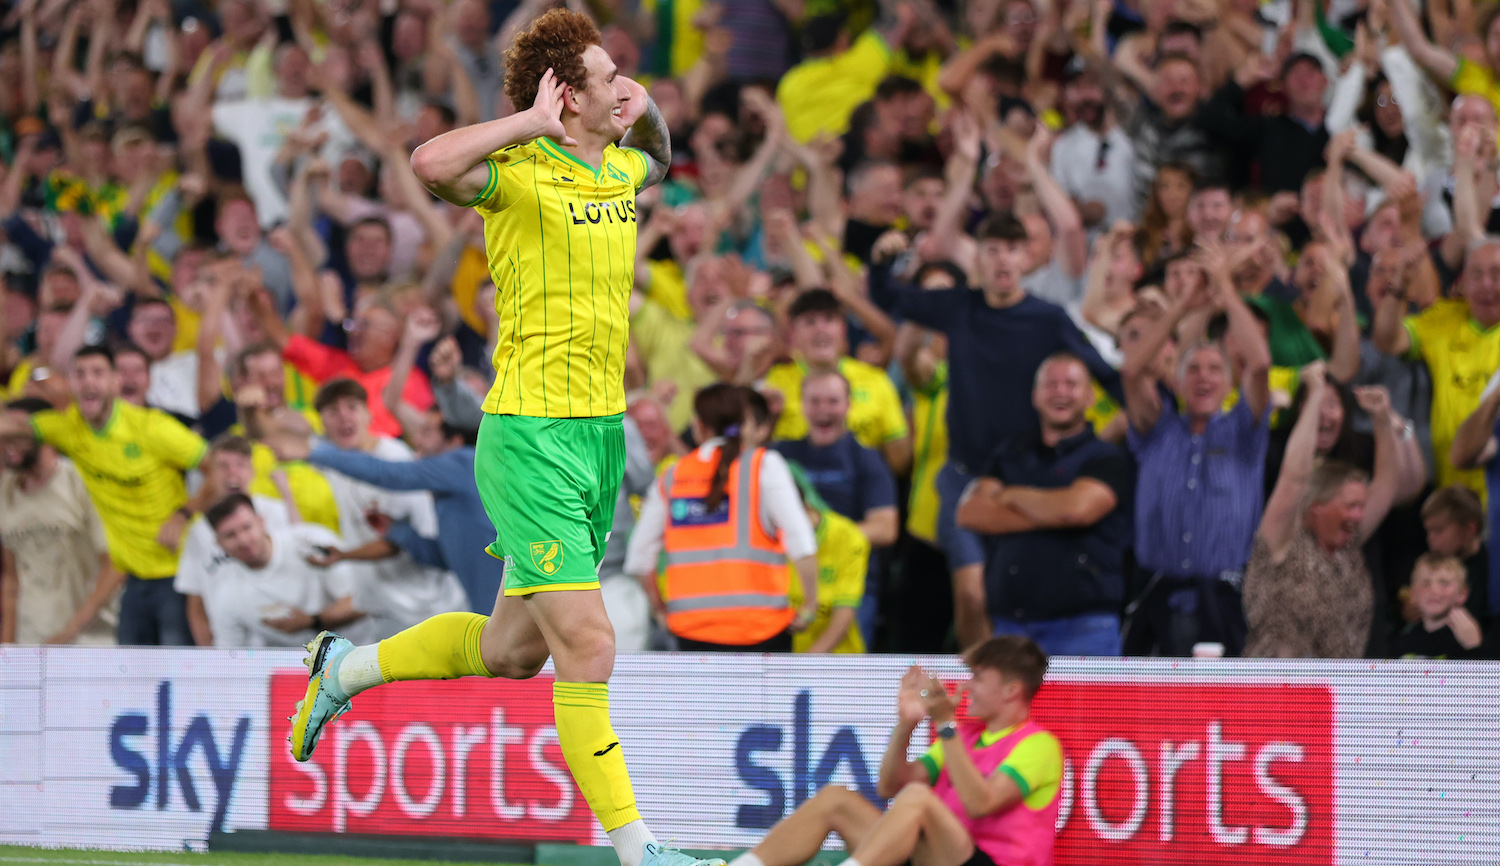 NORWICH, ENGLAND - AUGUST 19: Josh Sargent of Norwich City celebrates scoring the opening goal during the Sky Bet Championship between Norwich City and Millwall at Carrow Road on August 19, 2022 in Norwich, United Kingdom. (Photo by Marc Atkins/Getty Images)